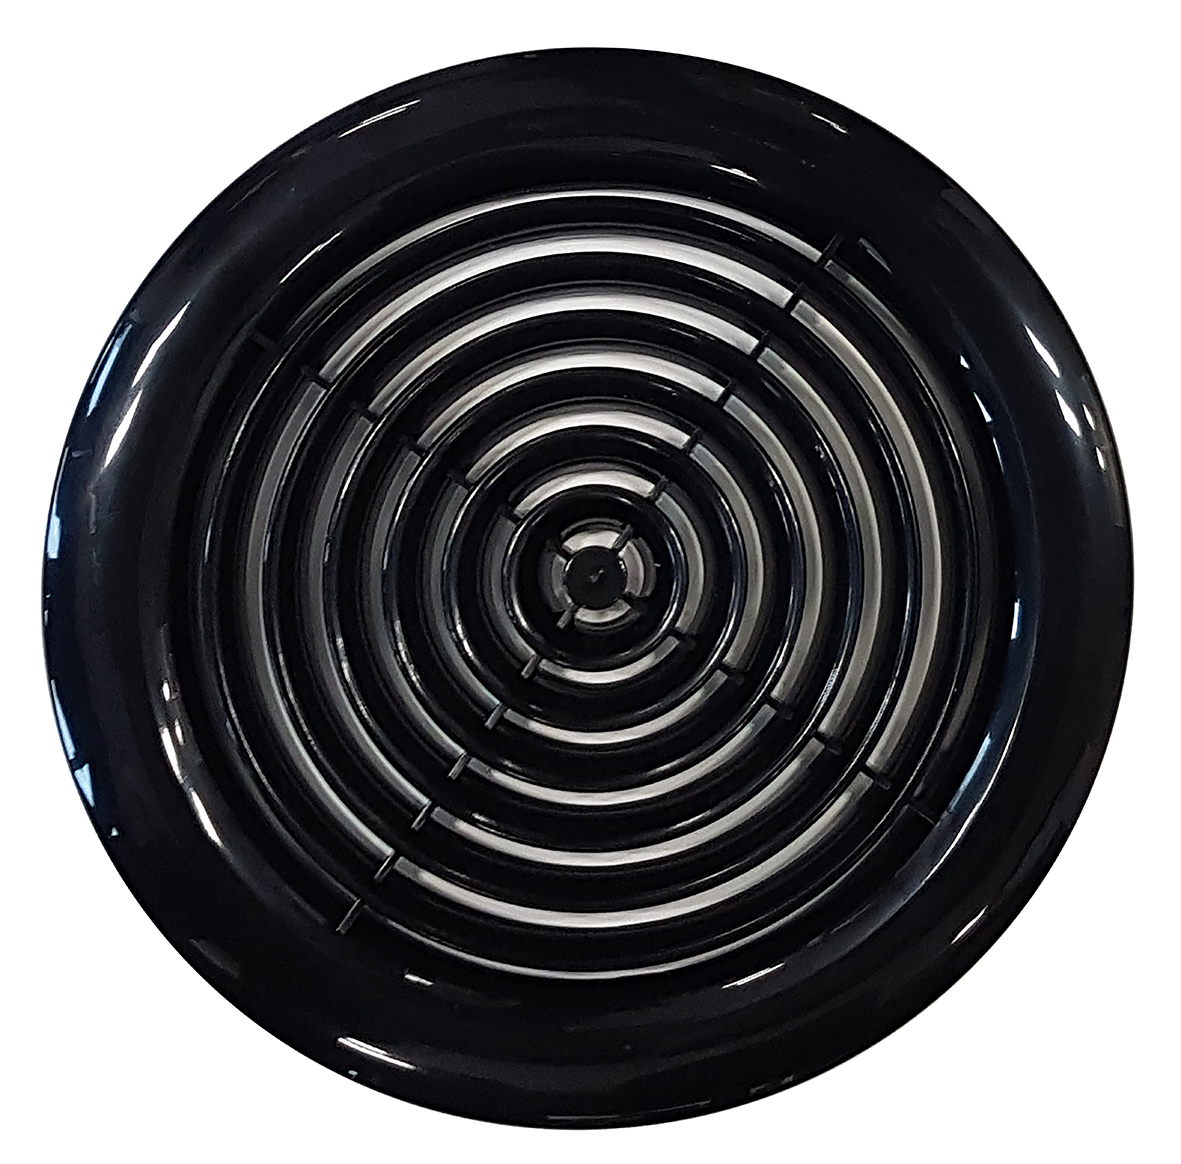 Manrose Pro Series Wall/Ceiling Grille Round 150mm Black